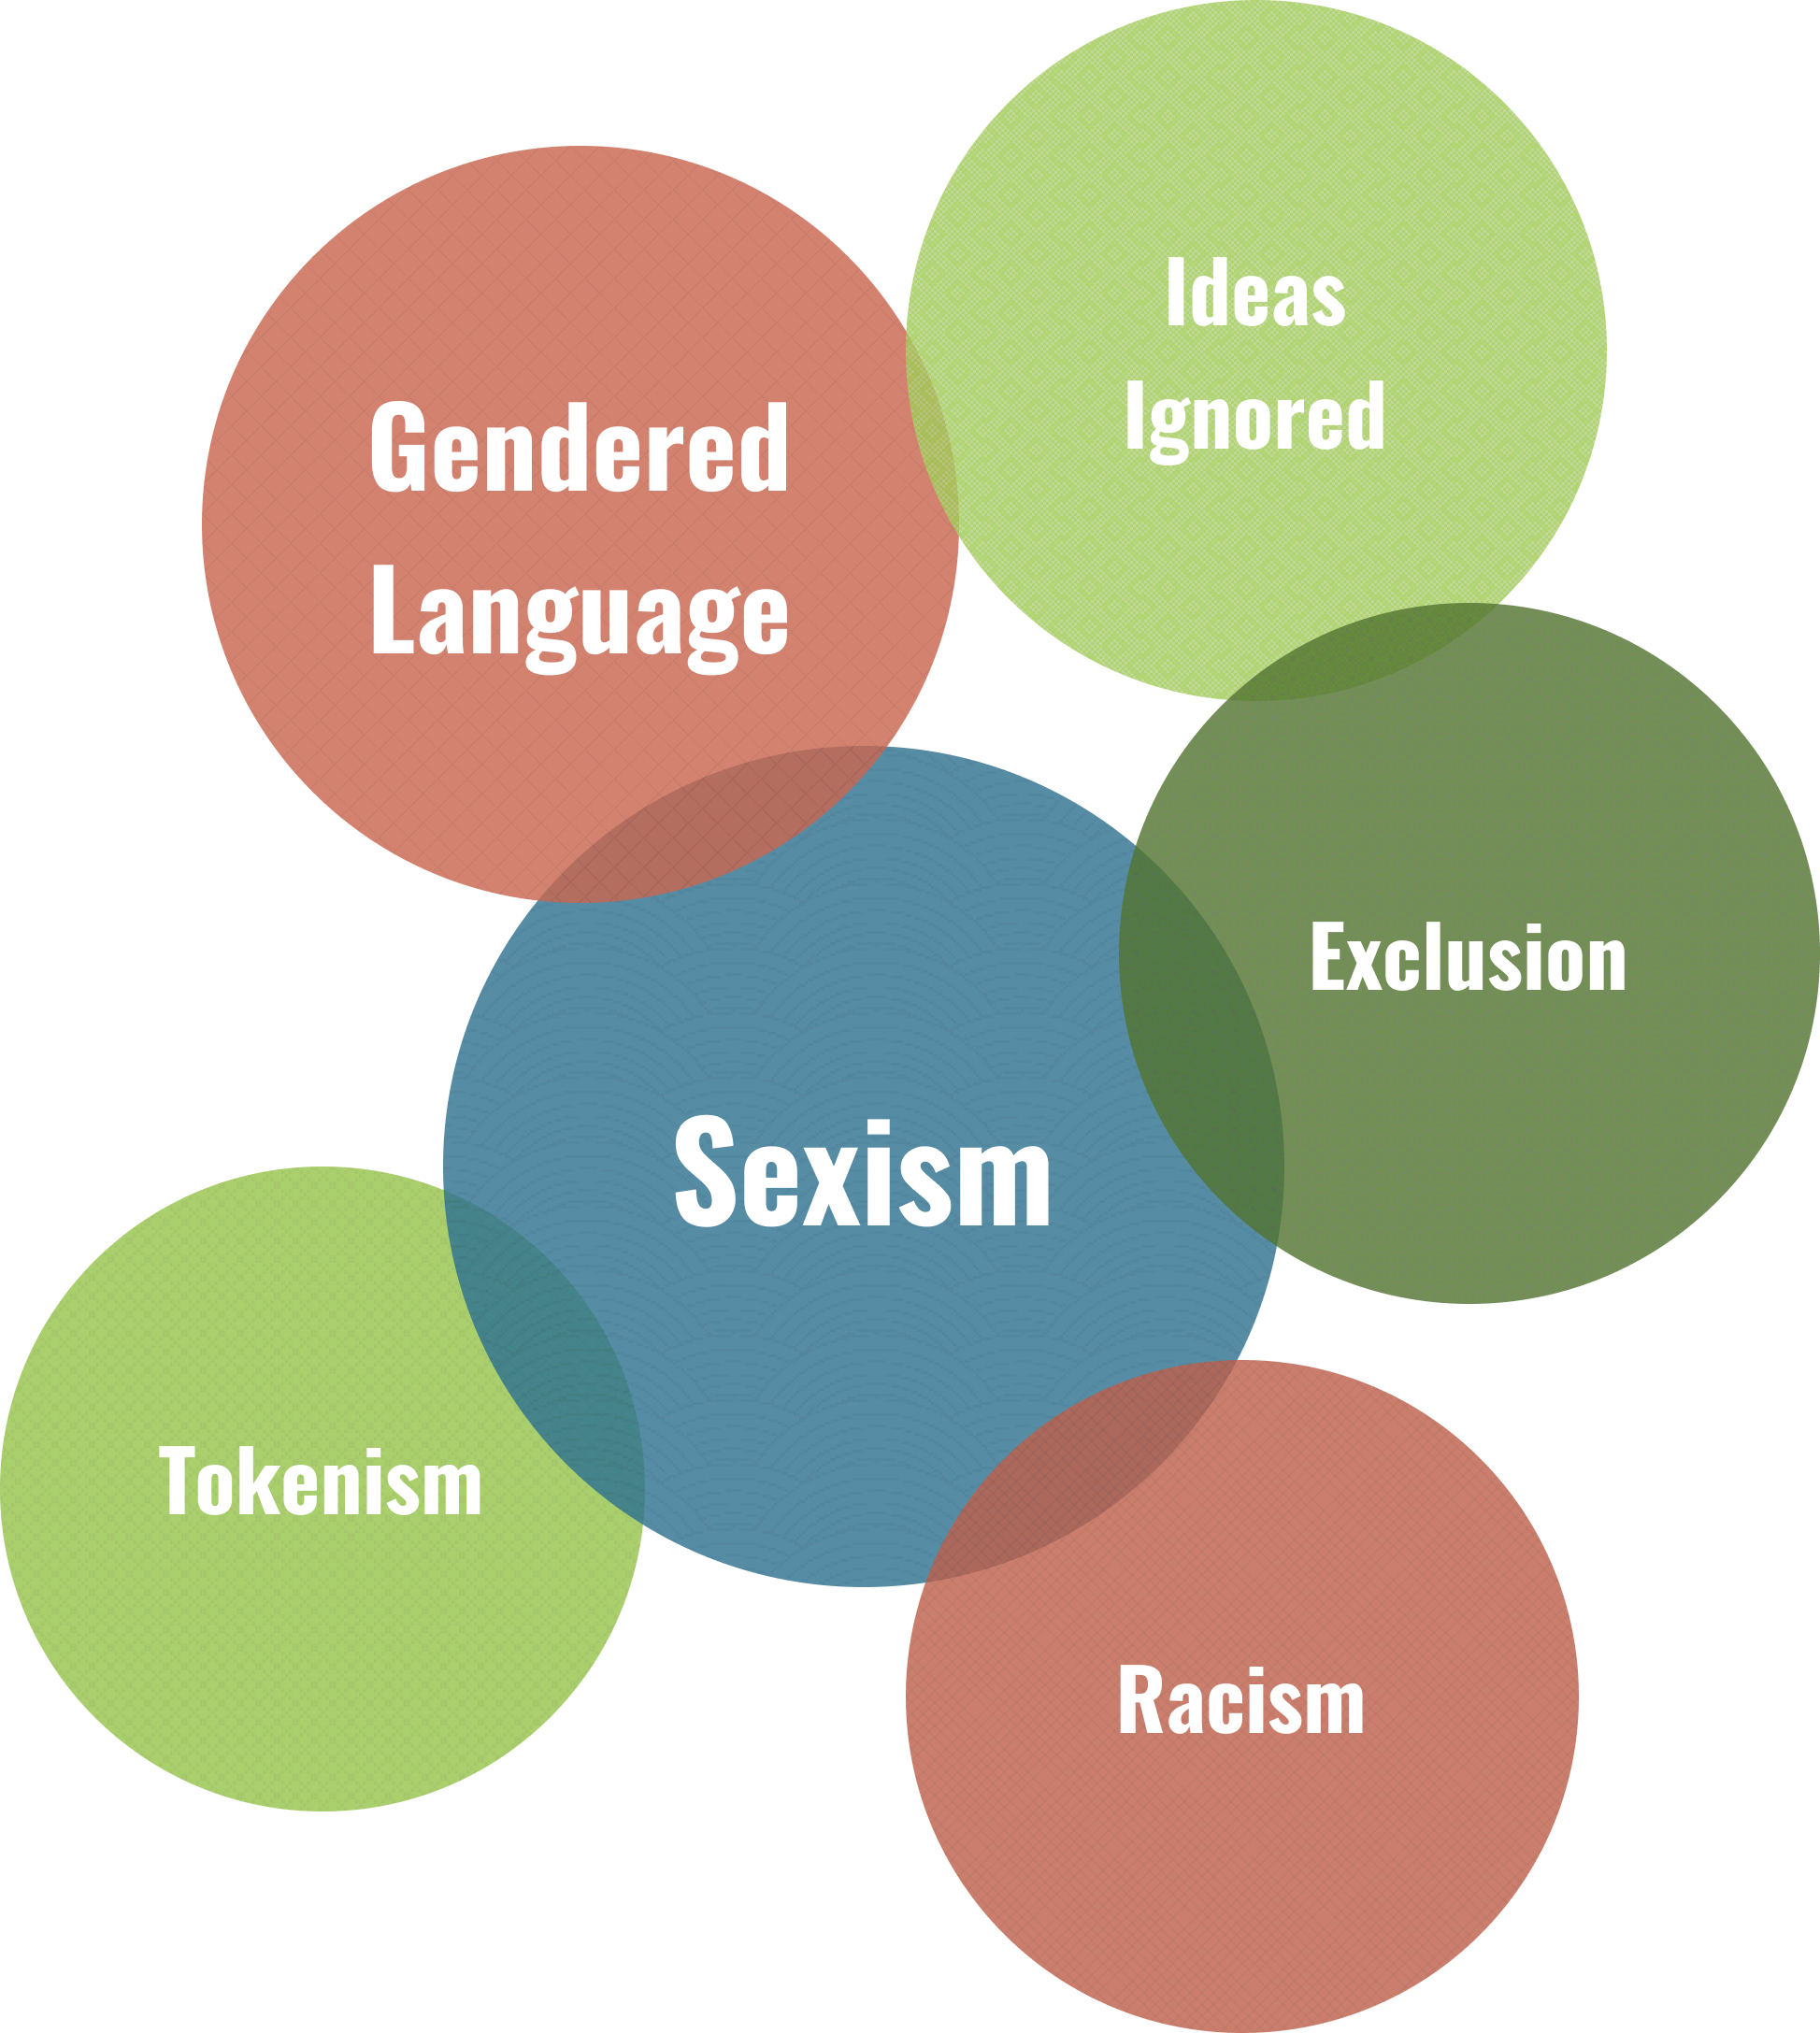 In order of most to least: Sexism, Gendered Language, Ideas Ignored, Exclusion, Racism, Tokenism.